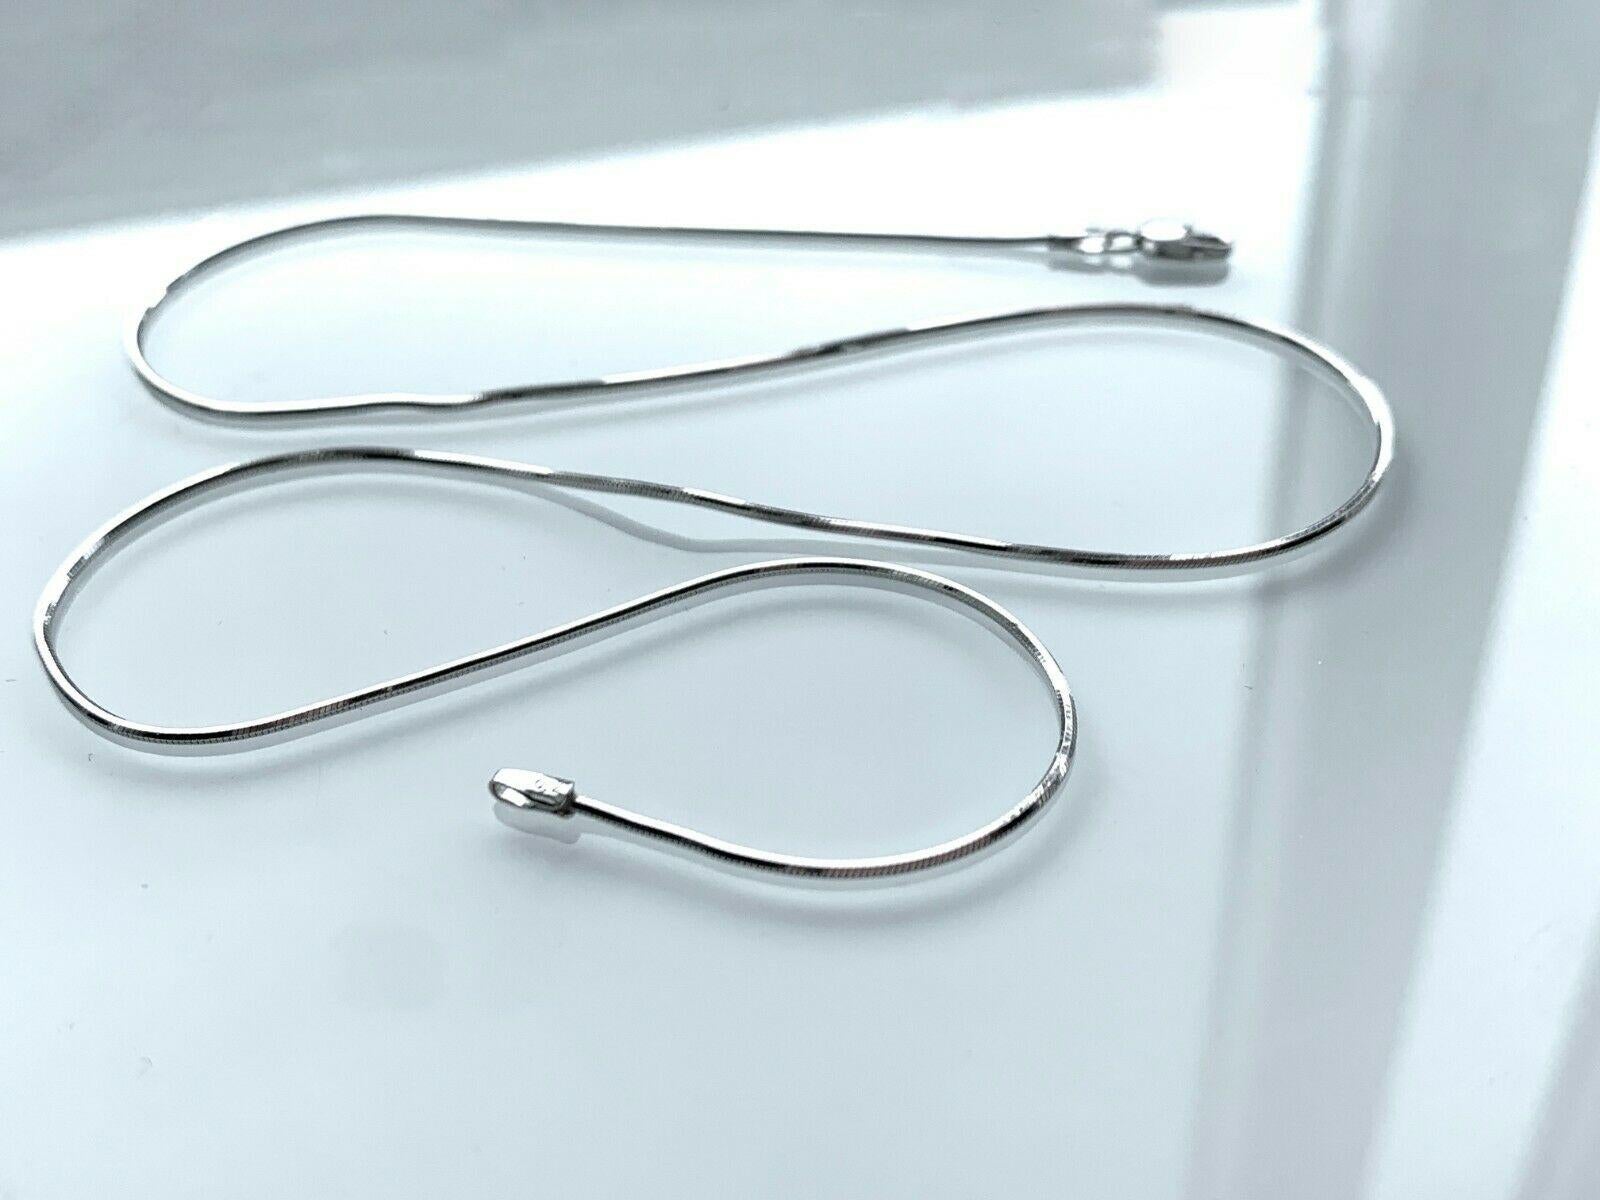 18ct 750 White Gold Necklace
Modern bright and shiny - smooth & slinky !
Thickness 1mm 
Length 18